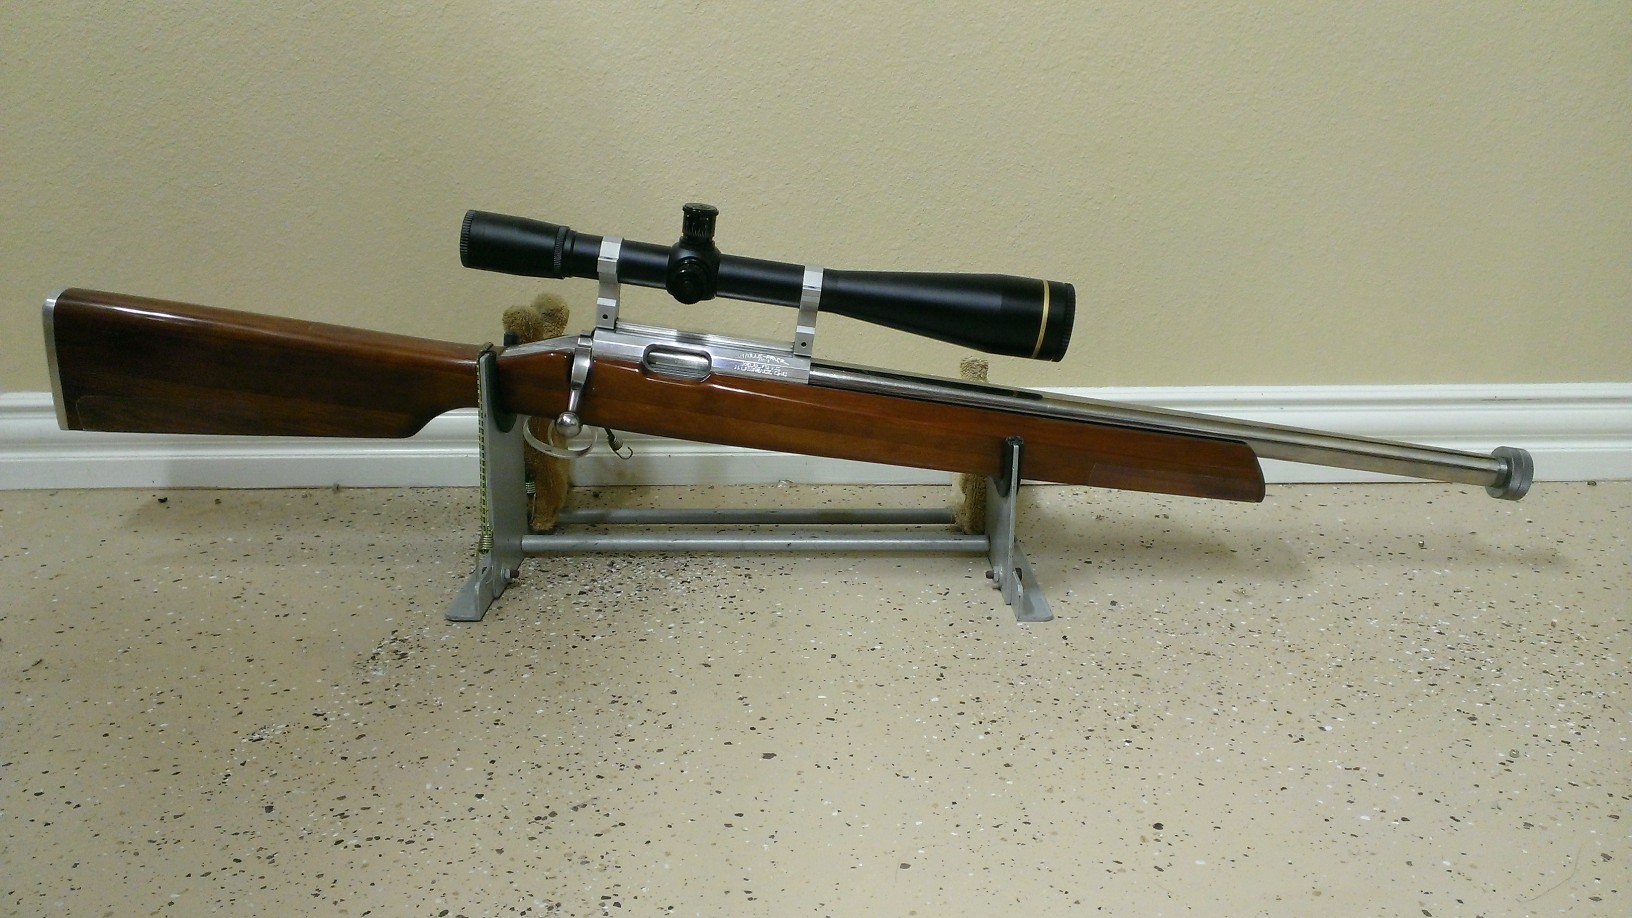 Michael Stinnett: The rifle that shot Smallest group ever fired in competition